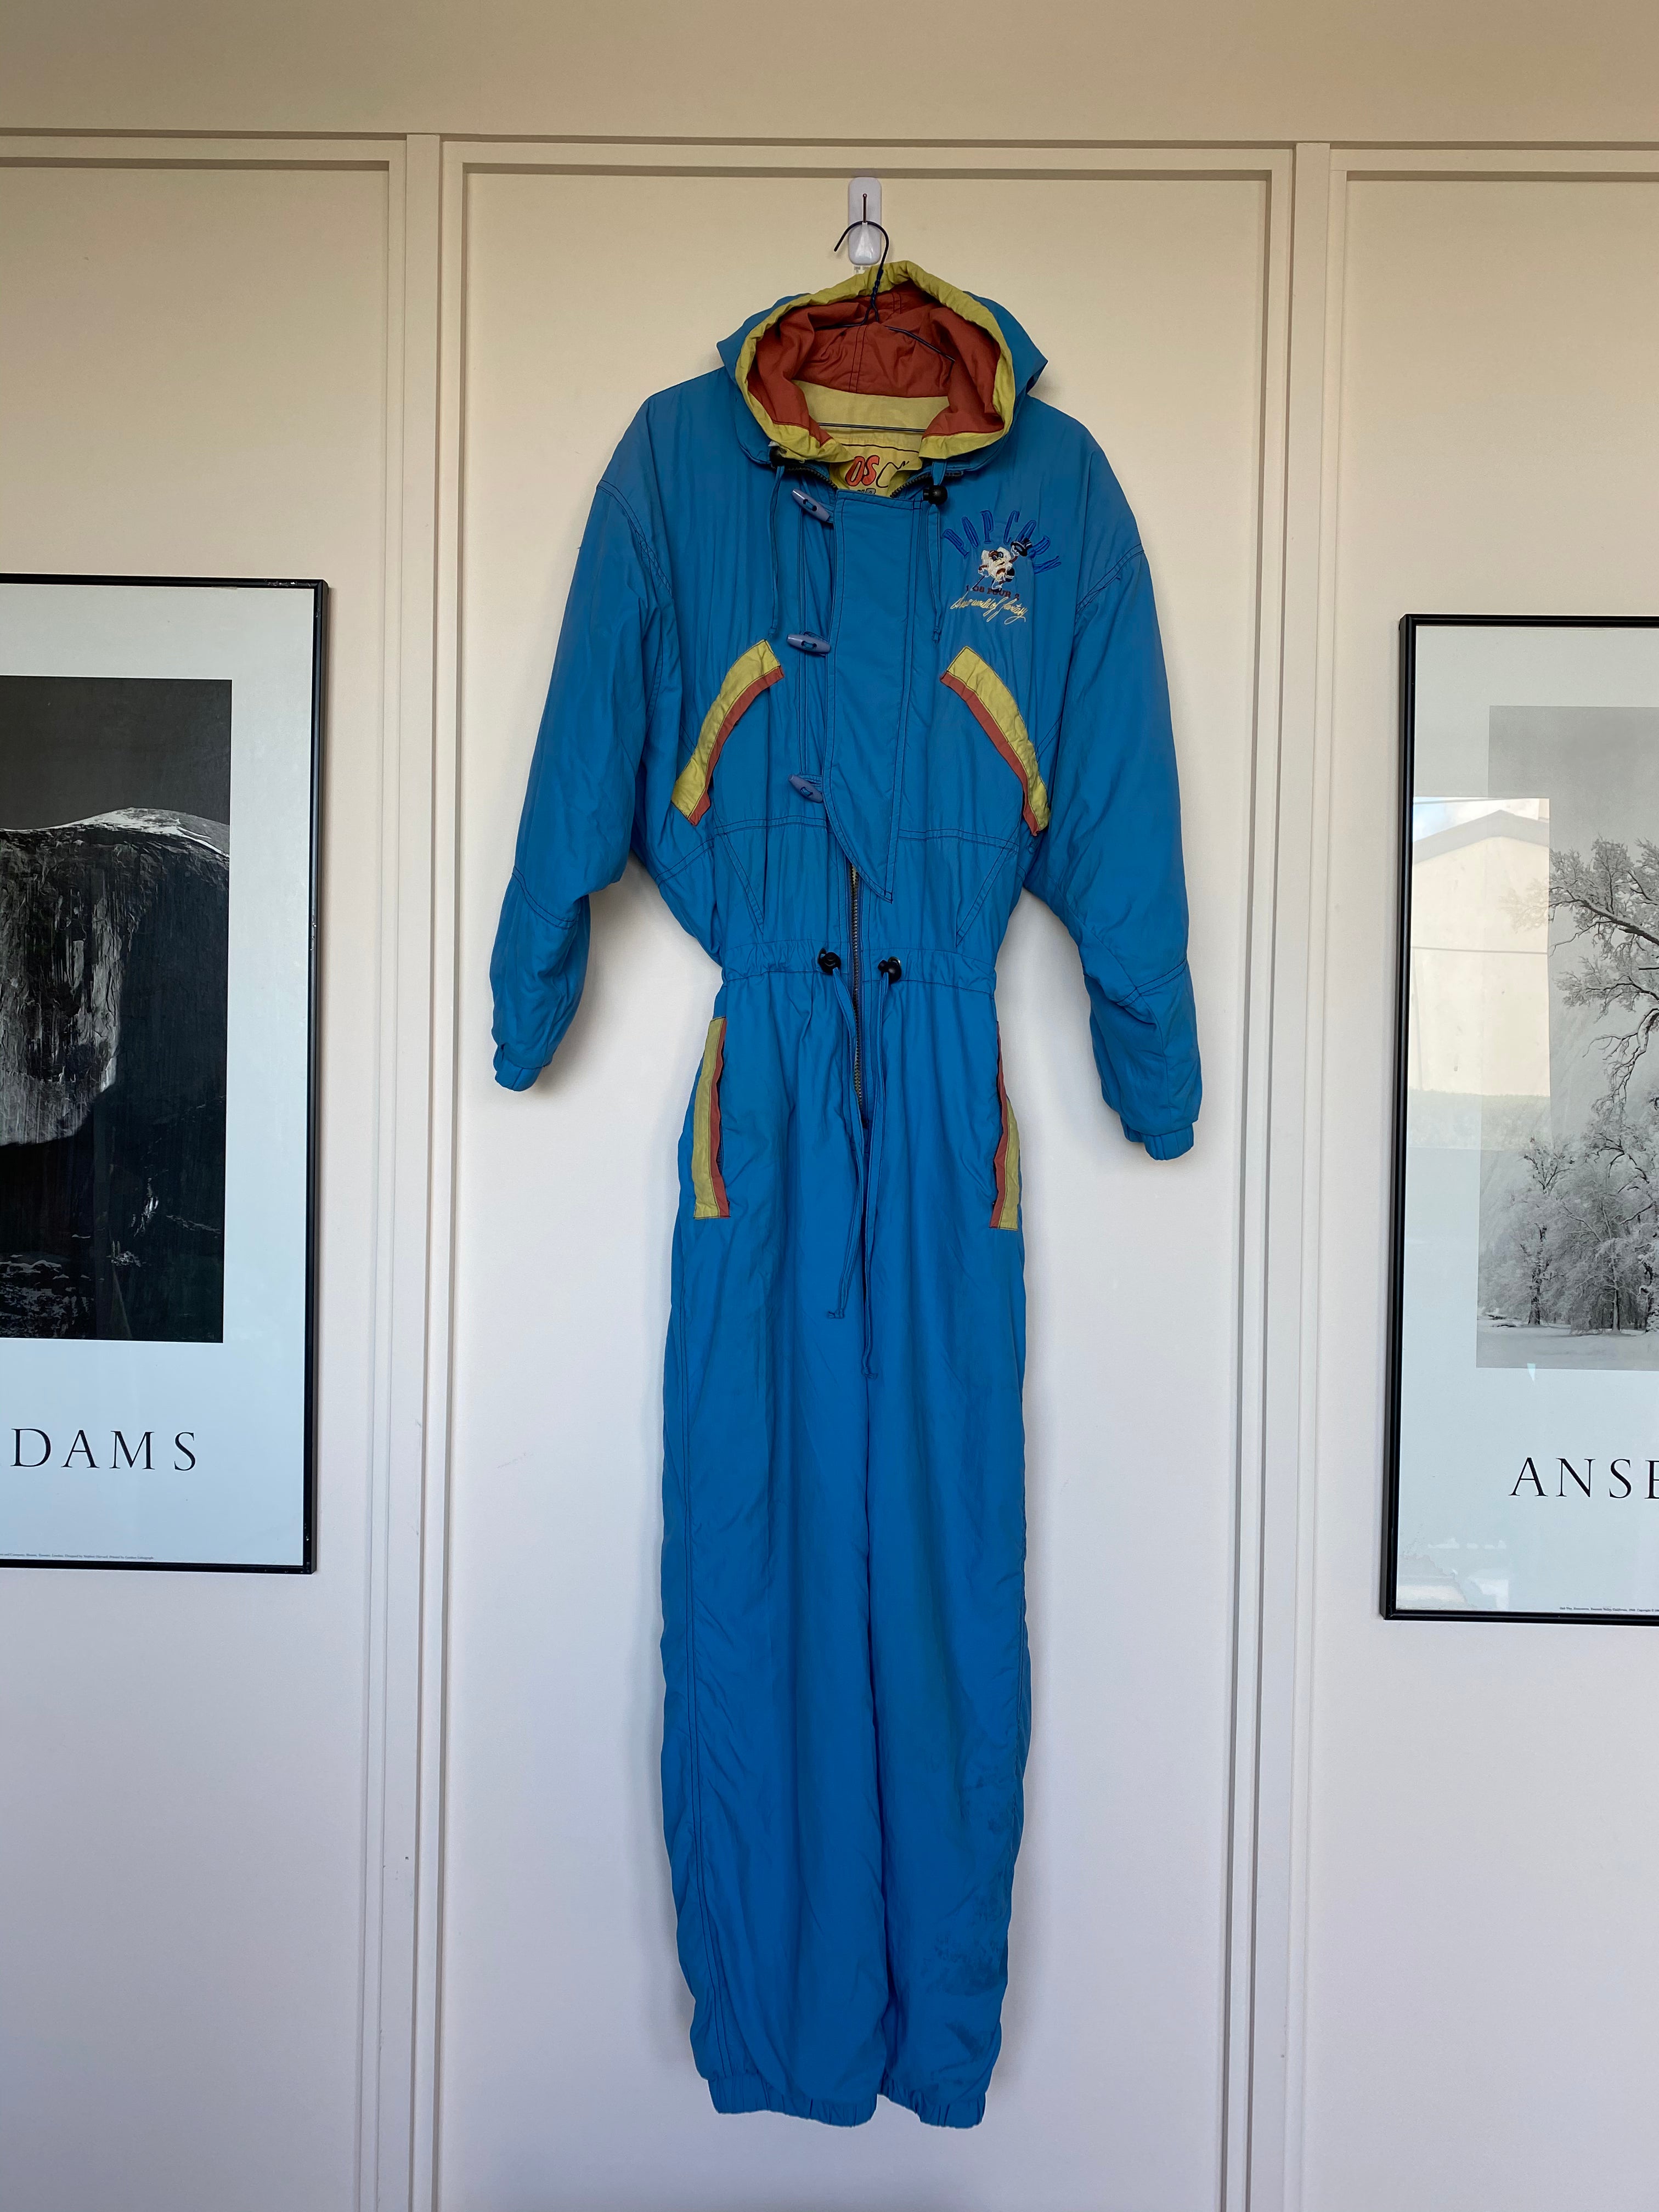 Vintage cornflower blue, with yellow and orange stripe "10S Pour 2" 1-piece snow suit with embroidery "Popcorn 10s Pour 2, A New World of Fantasy" on back shoulder and front right hand chest. Front